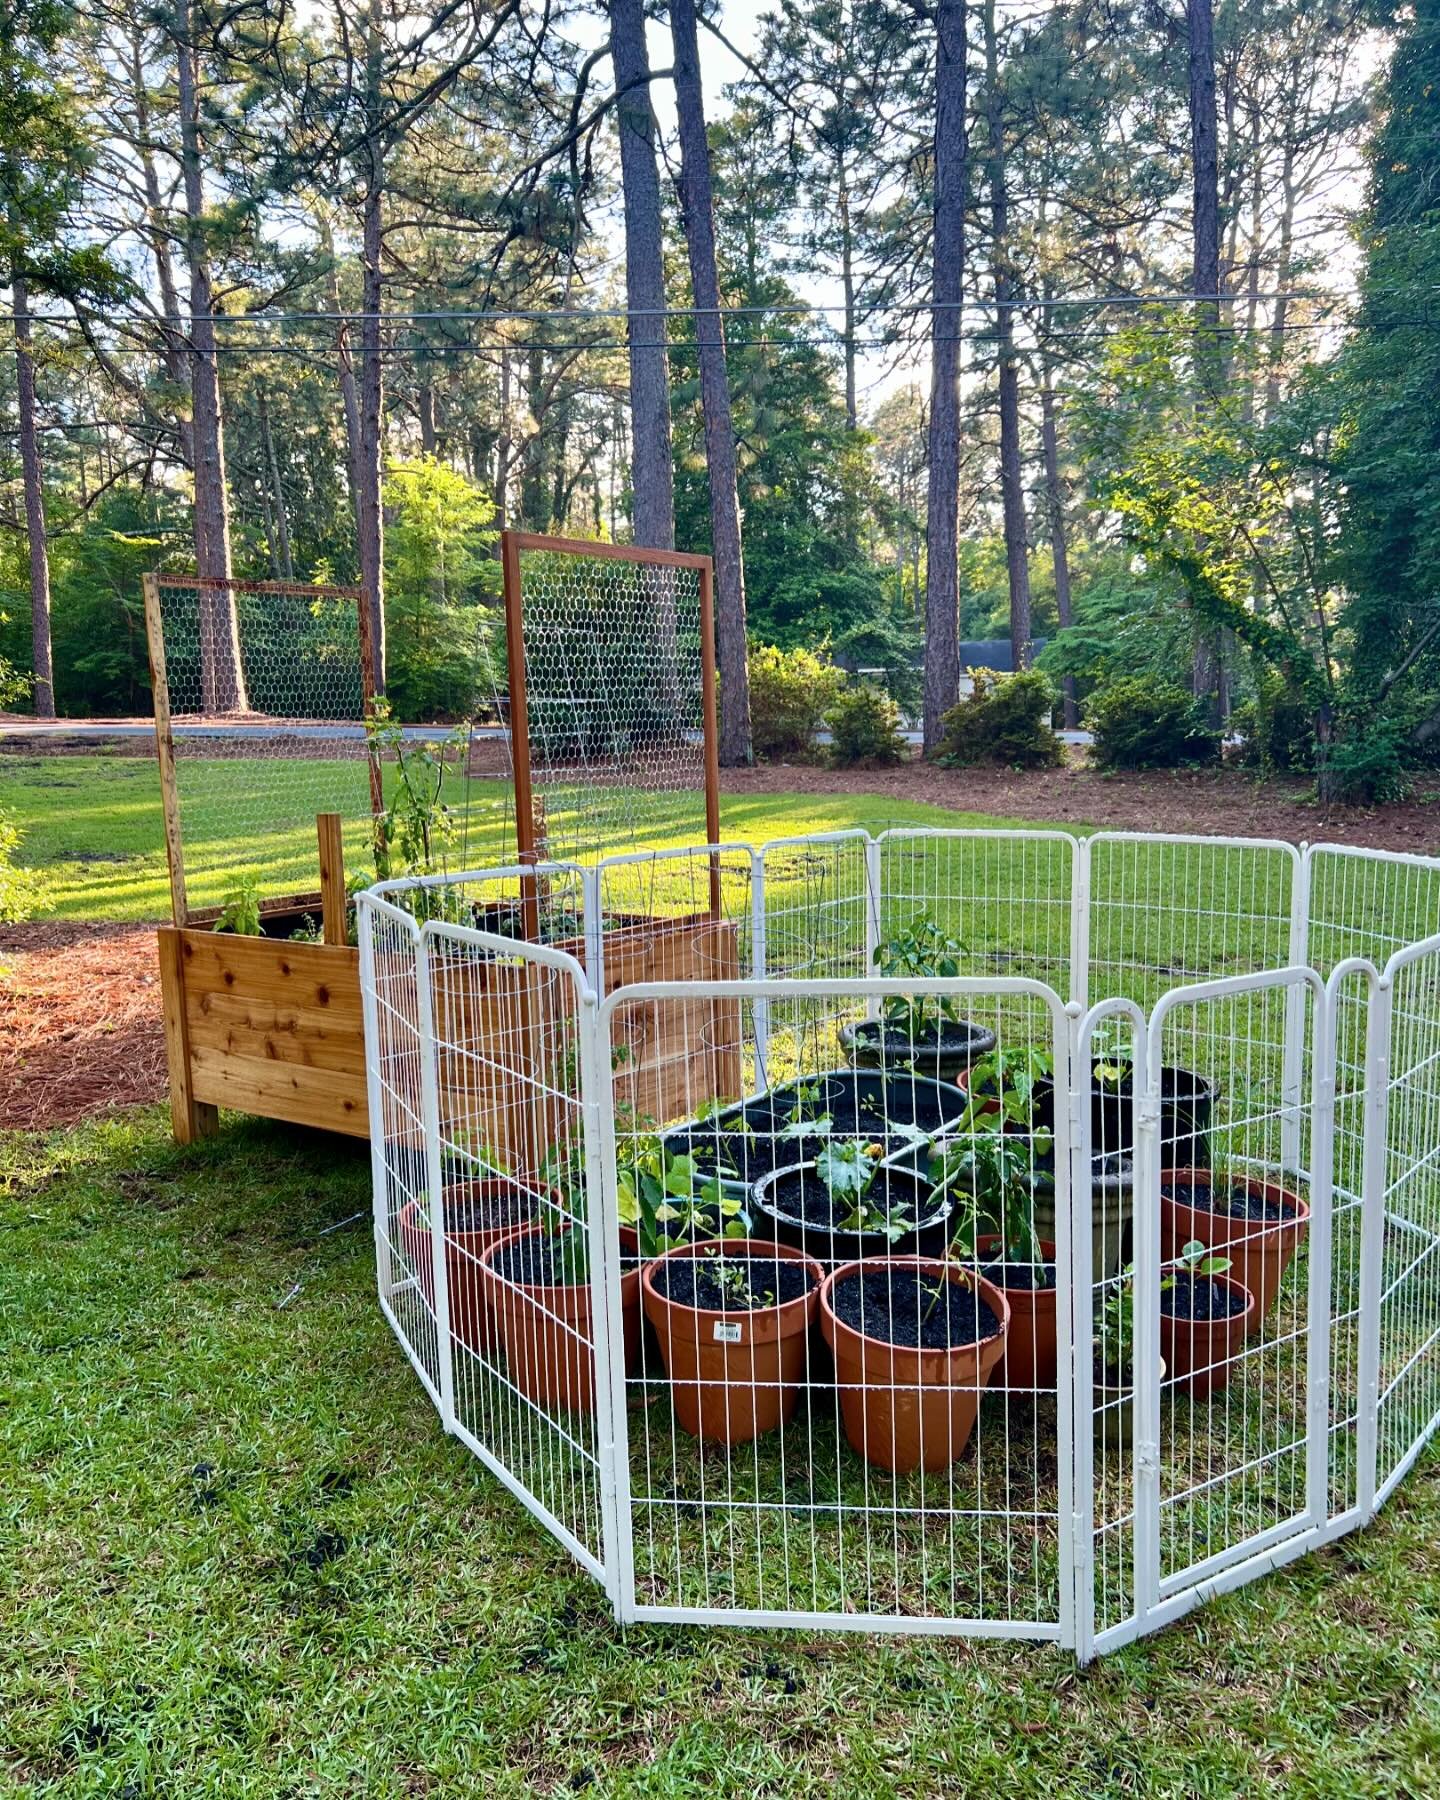 👩🏻&zwj;🌾 first attempt at raised bed gardening and potted vegetable plants! Who knew a dog play pen could come in handy to protect plants from deer (though I&rsquo;m certain the deer can jump it in a heartbeat. 🤷🏻&zwj;♀️). 

Any and all tips/adv